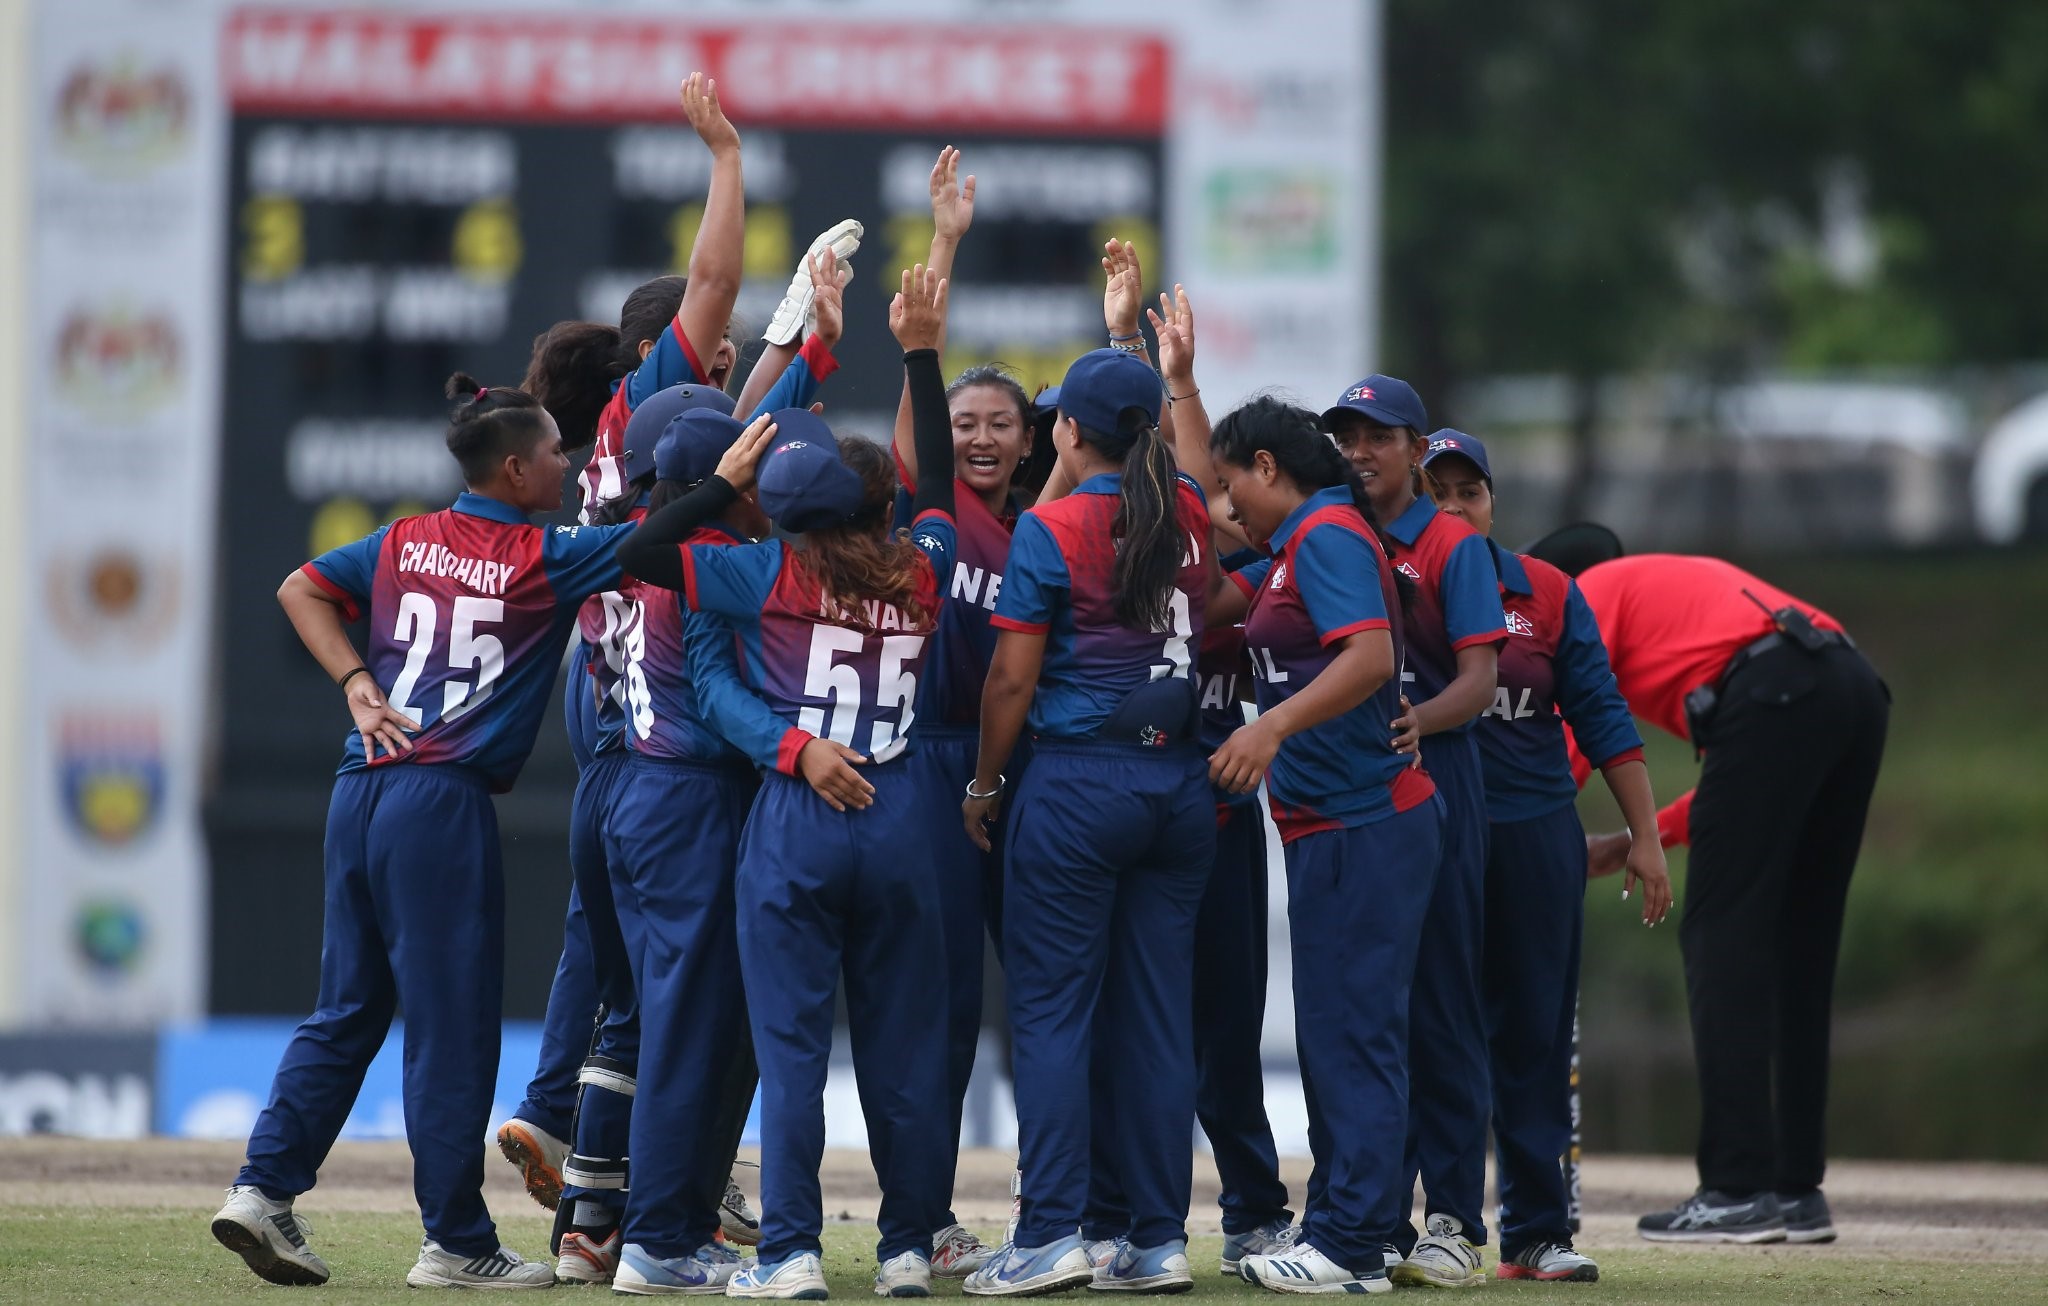 Nepal advanced to semifinals after defeating Bahrain